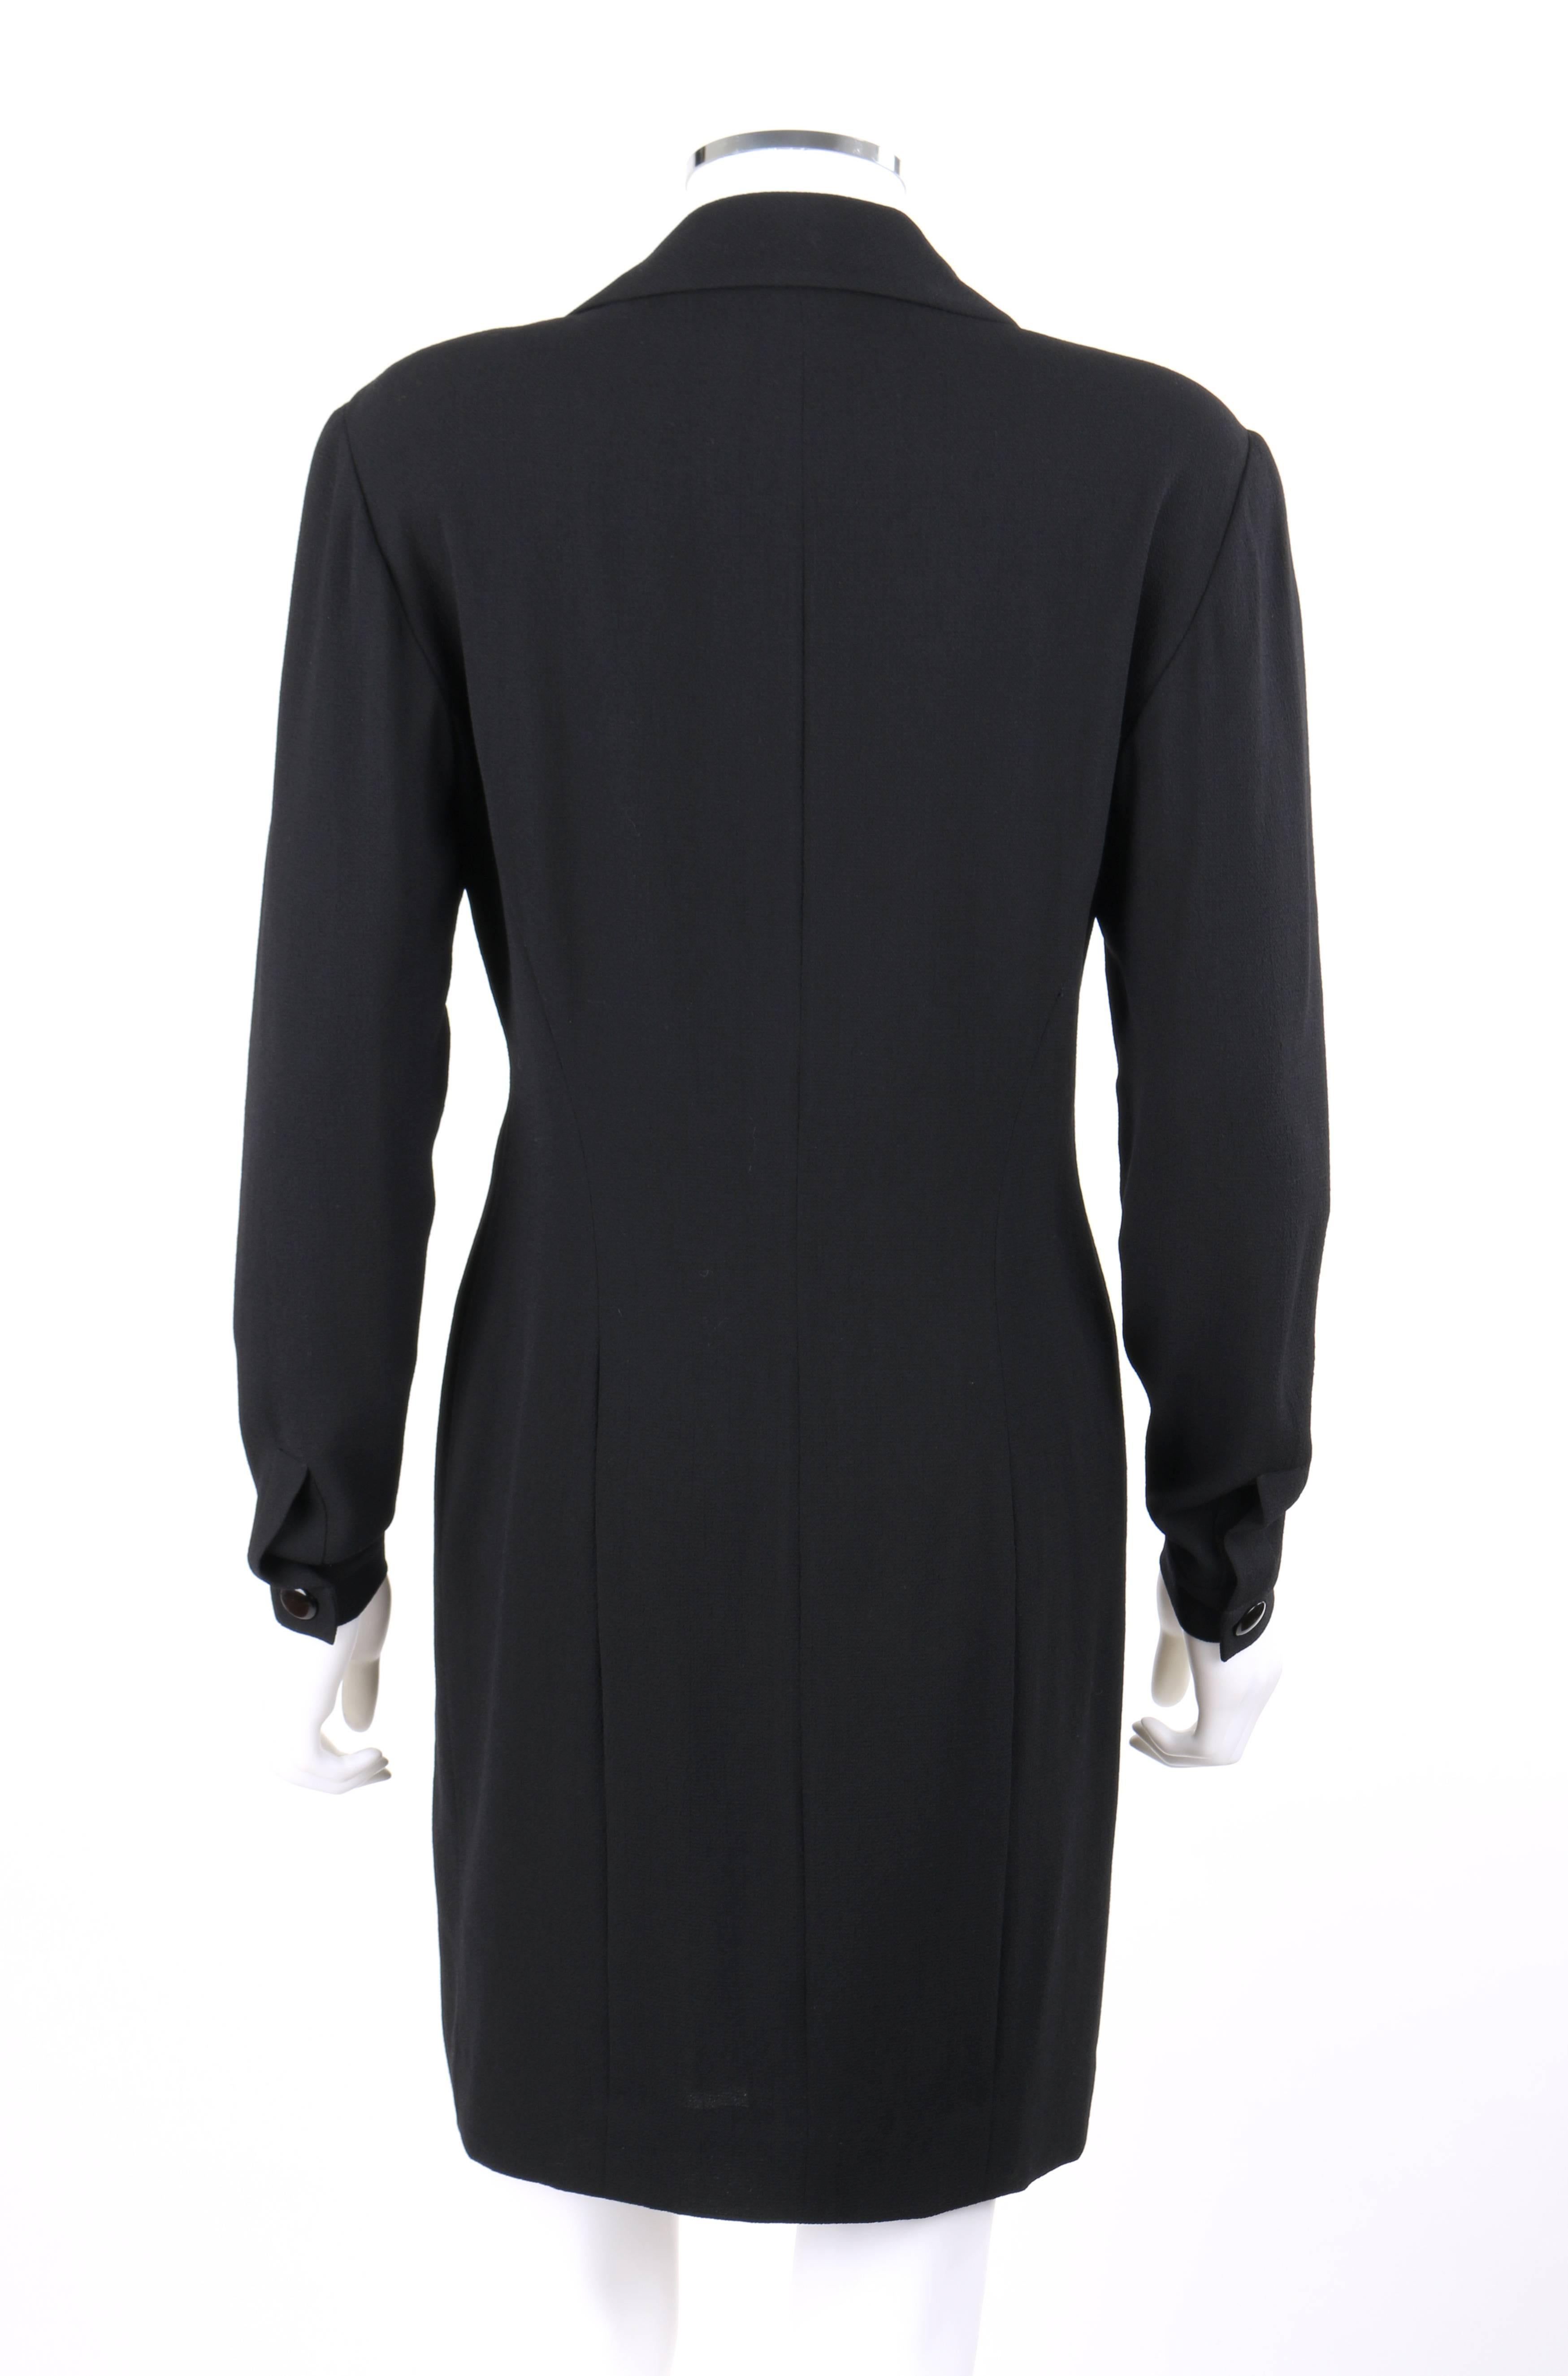 Women's CHANEL Boutique c.1980's Black Wool Crepe Double Breasted One Piece Dress Suit